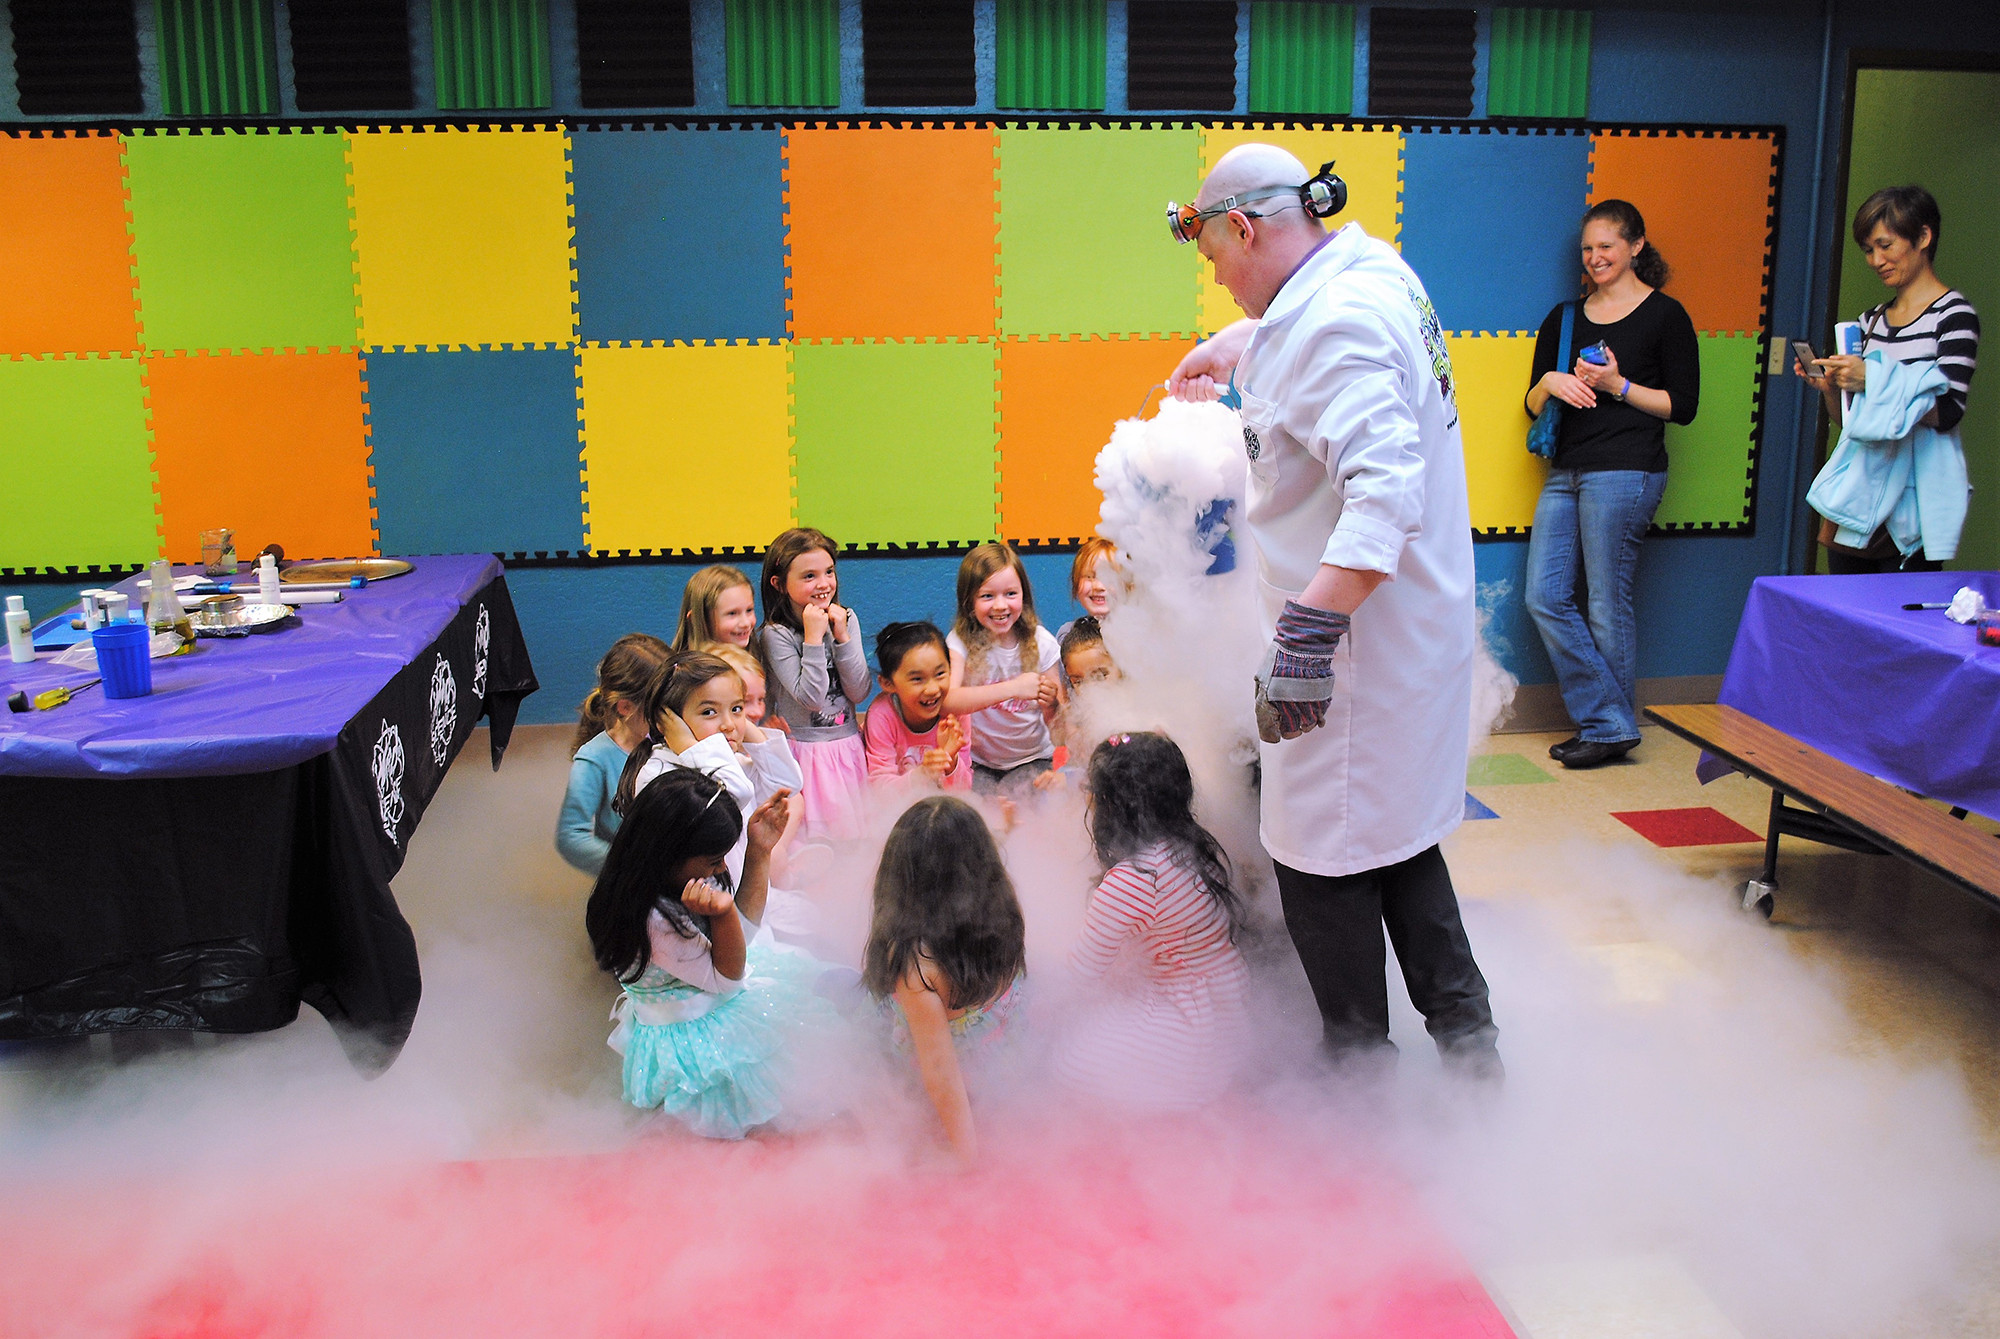 Kids Birthday Party Location Ideas
 Winter Kids Birthday Party Places